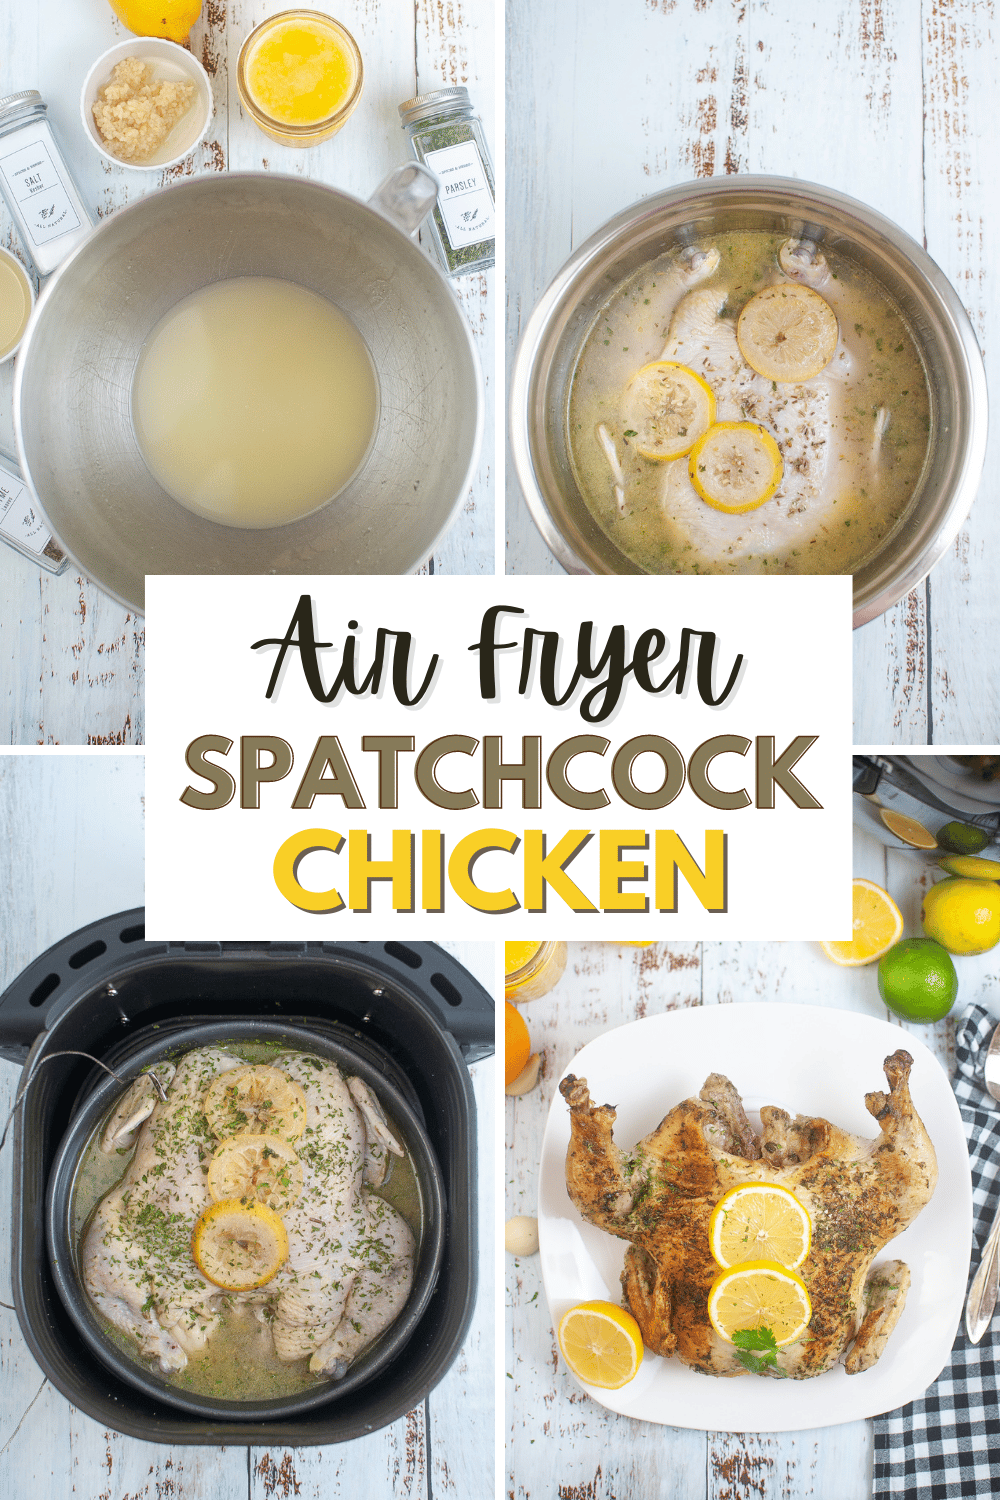 This Air Fryer Spatchcock Chicken is a great way to cook a whole chicken in under an hour. It's crispy on the outside and juicy on the inside. #airfryer #spatchcockchicken #wholechicken #chicken #spatchcock via @wondermomwannab